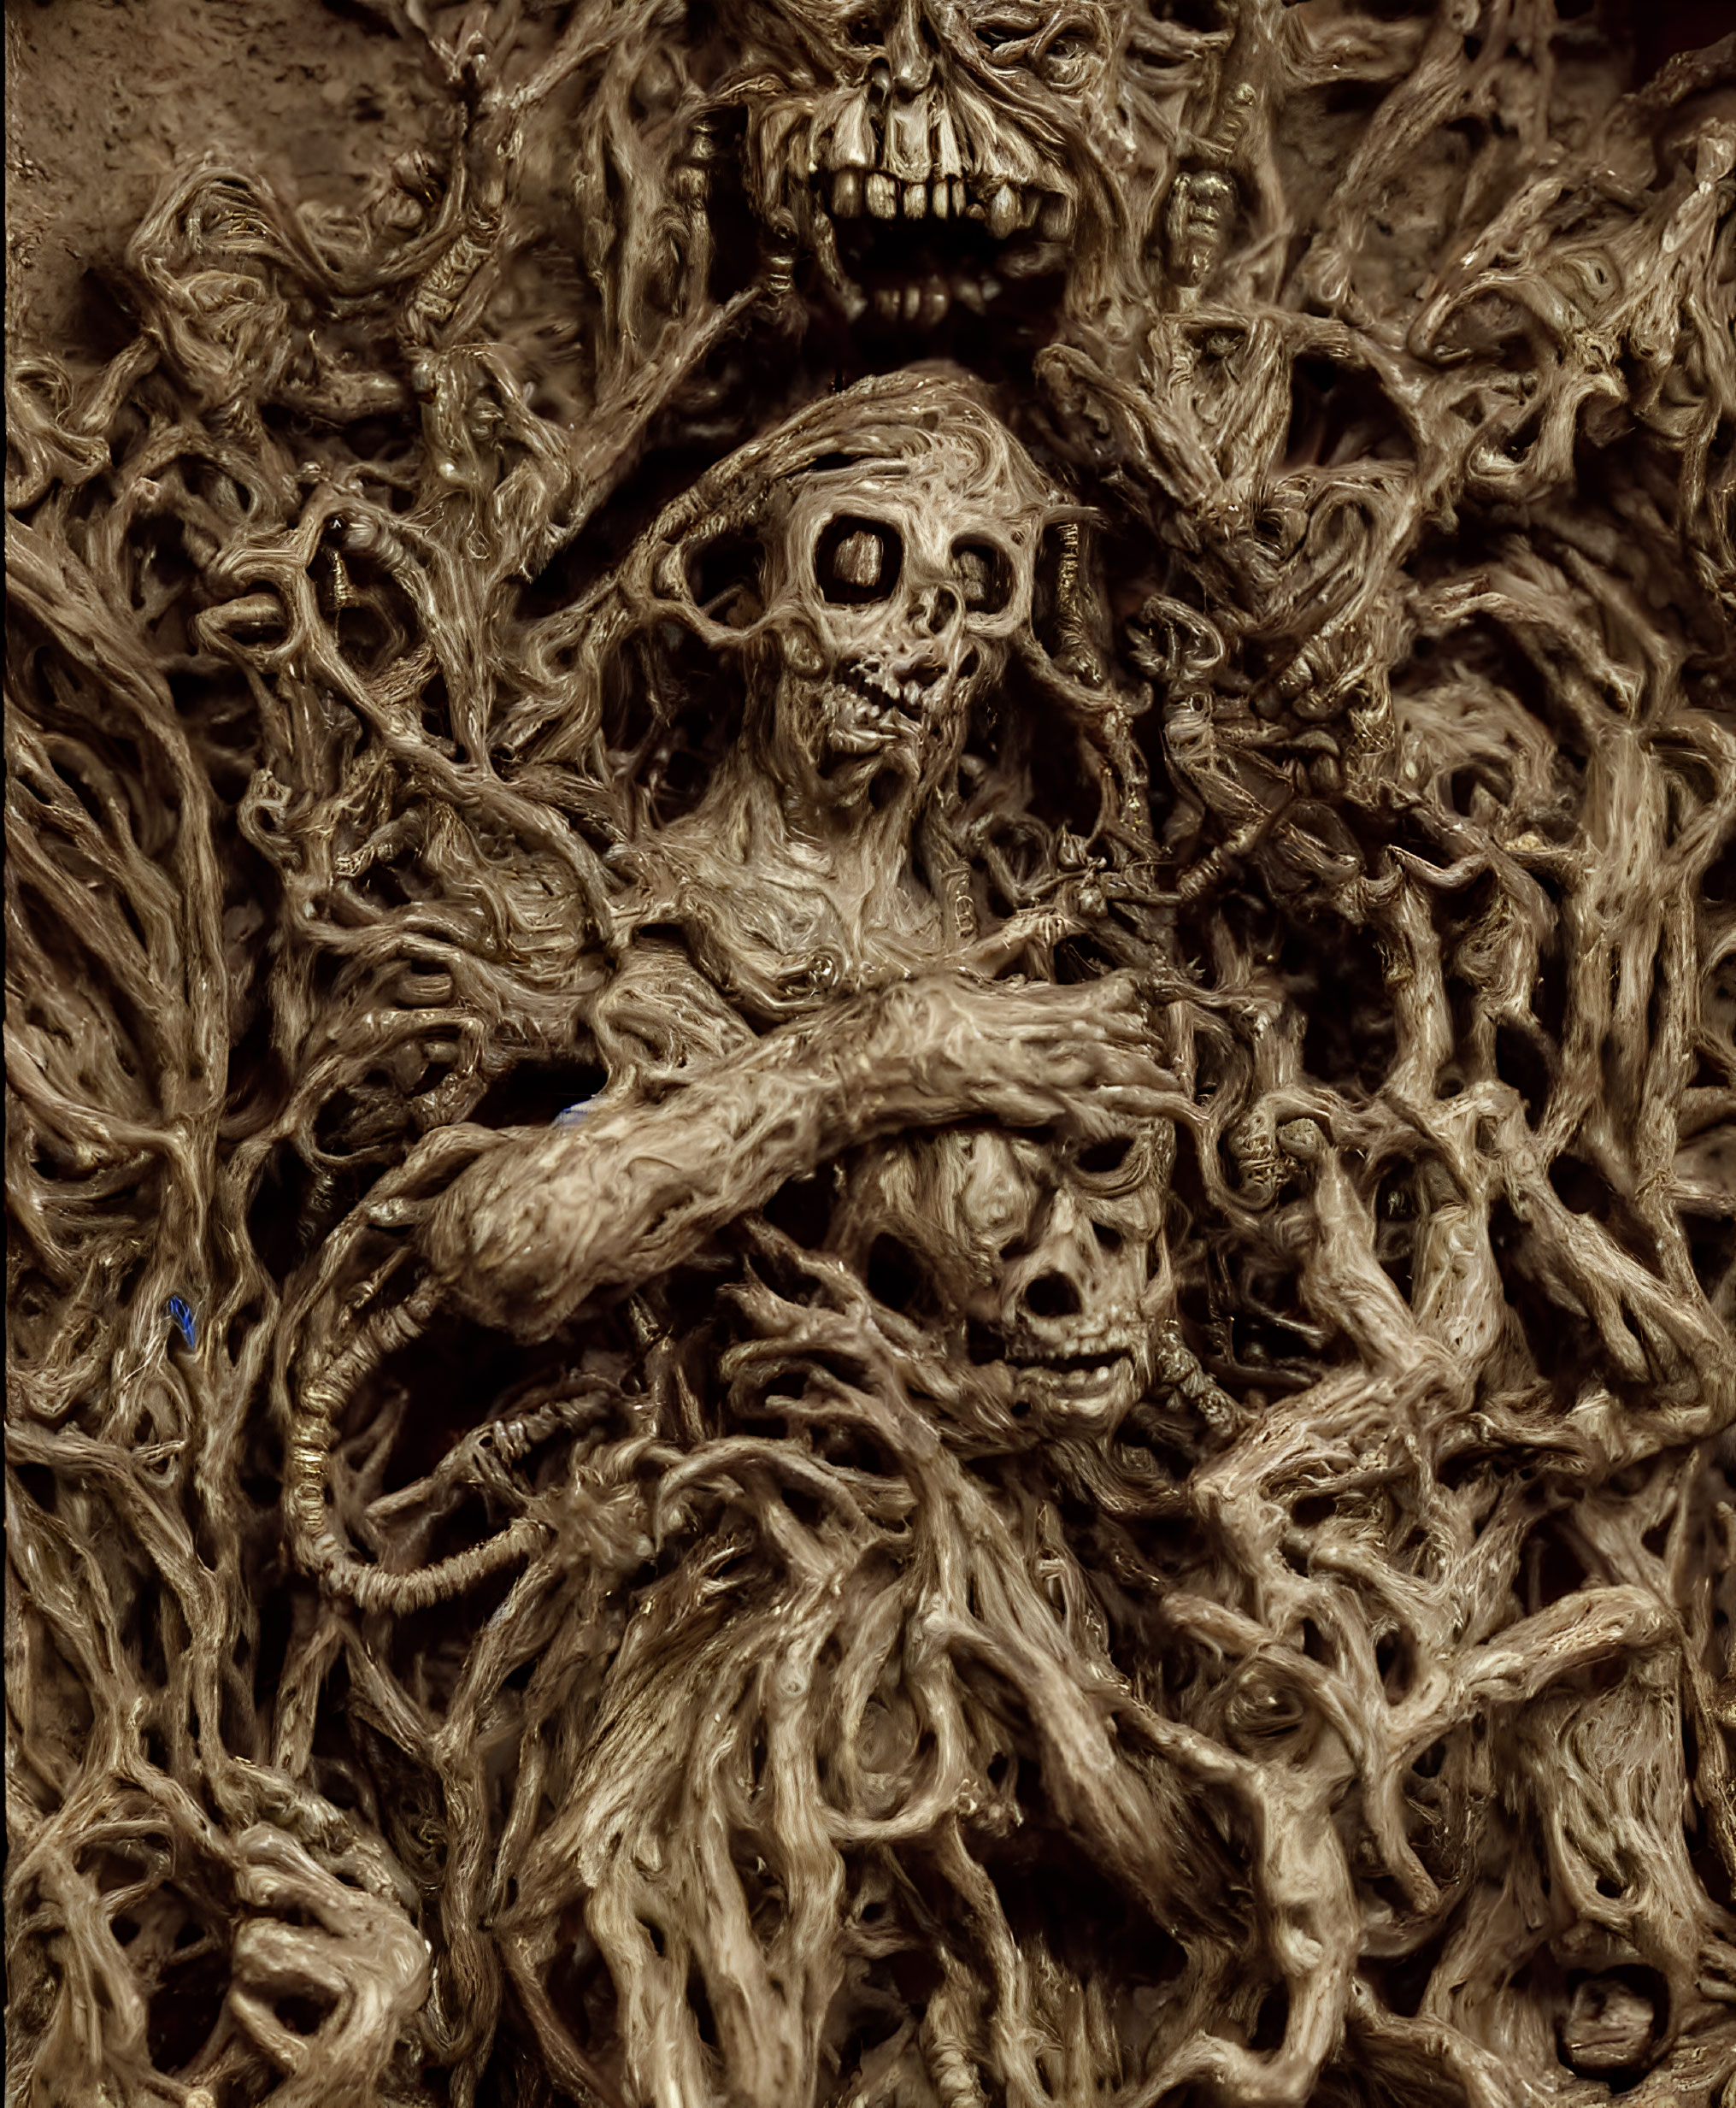 Eerie dark image with twisted root-like textures and skull-like figures